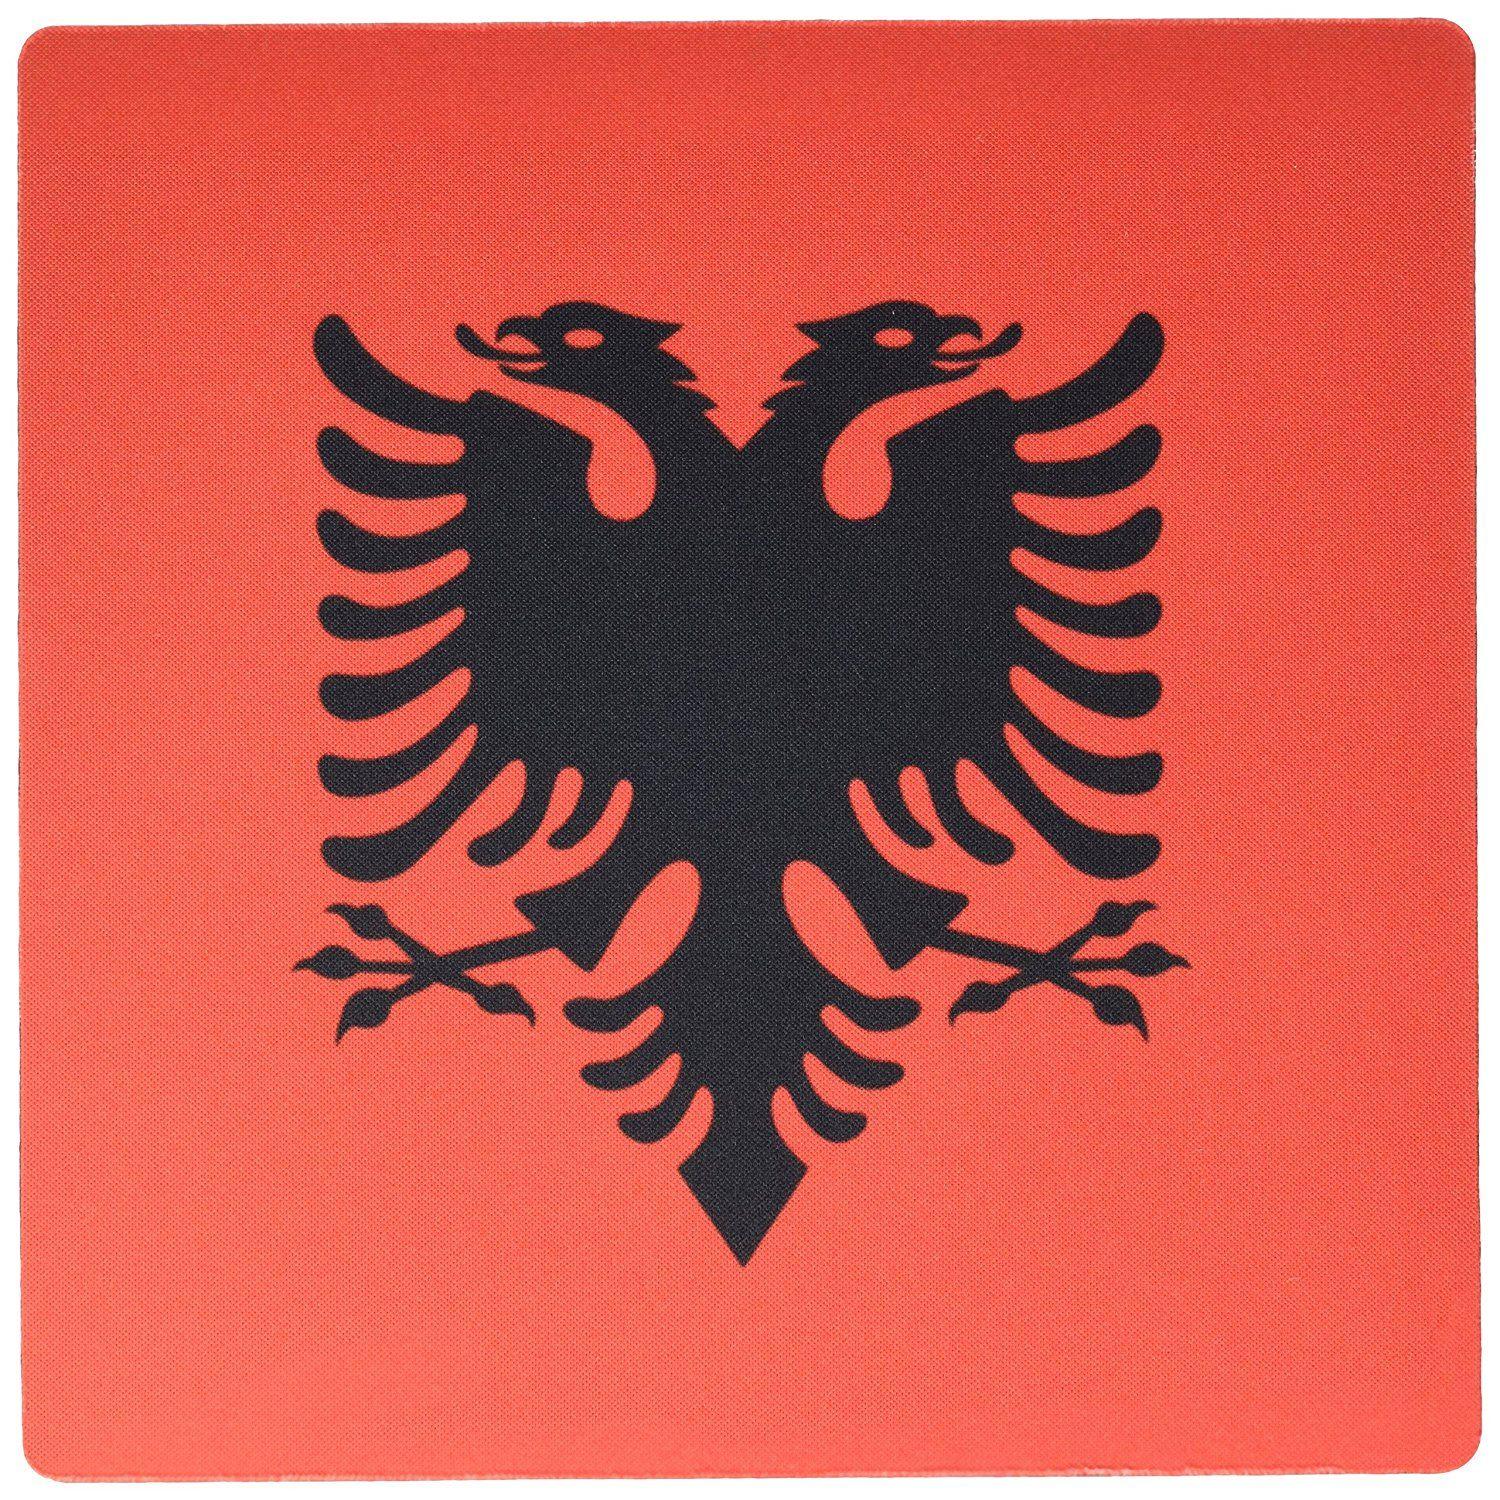 Red Double Headed Eagle Logo - Buy 3dRose Flag of Albania - Albanian black double headed eagle on ...